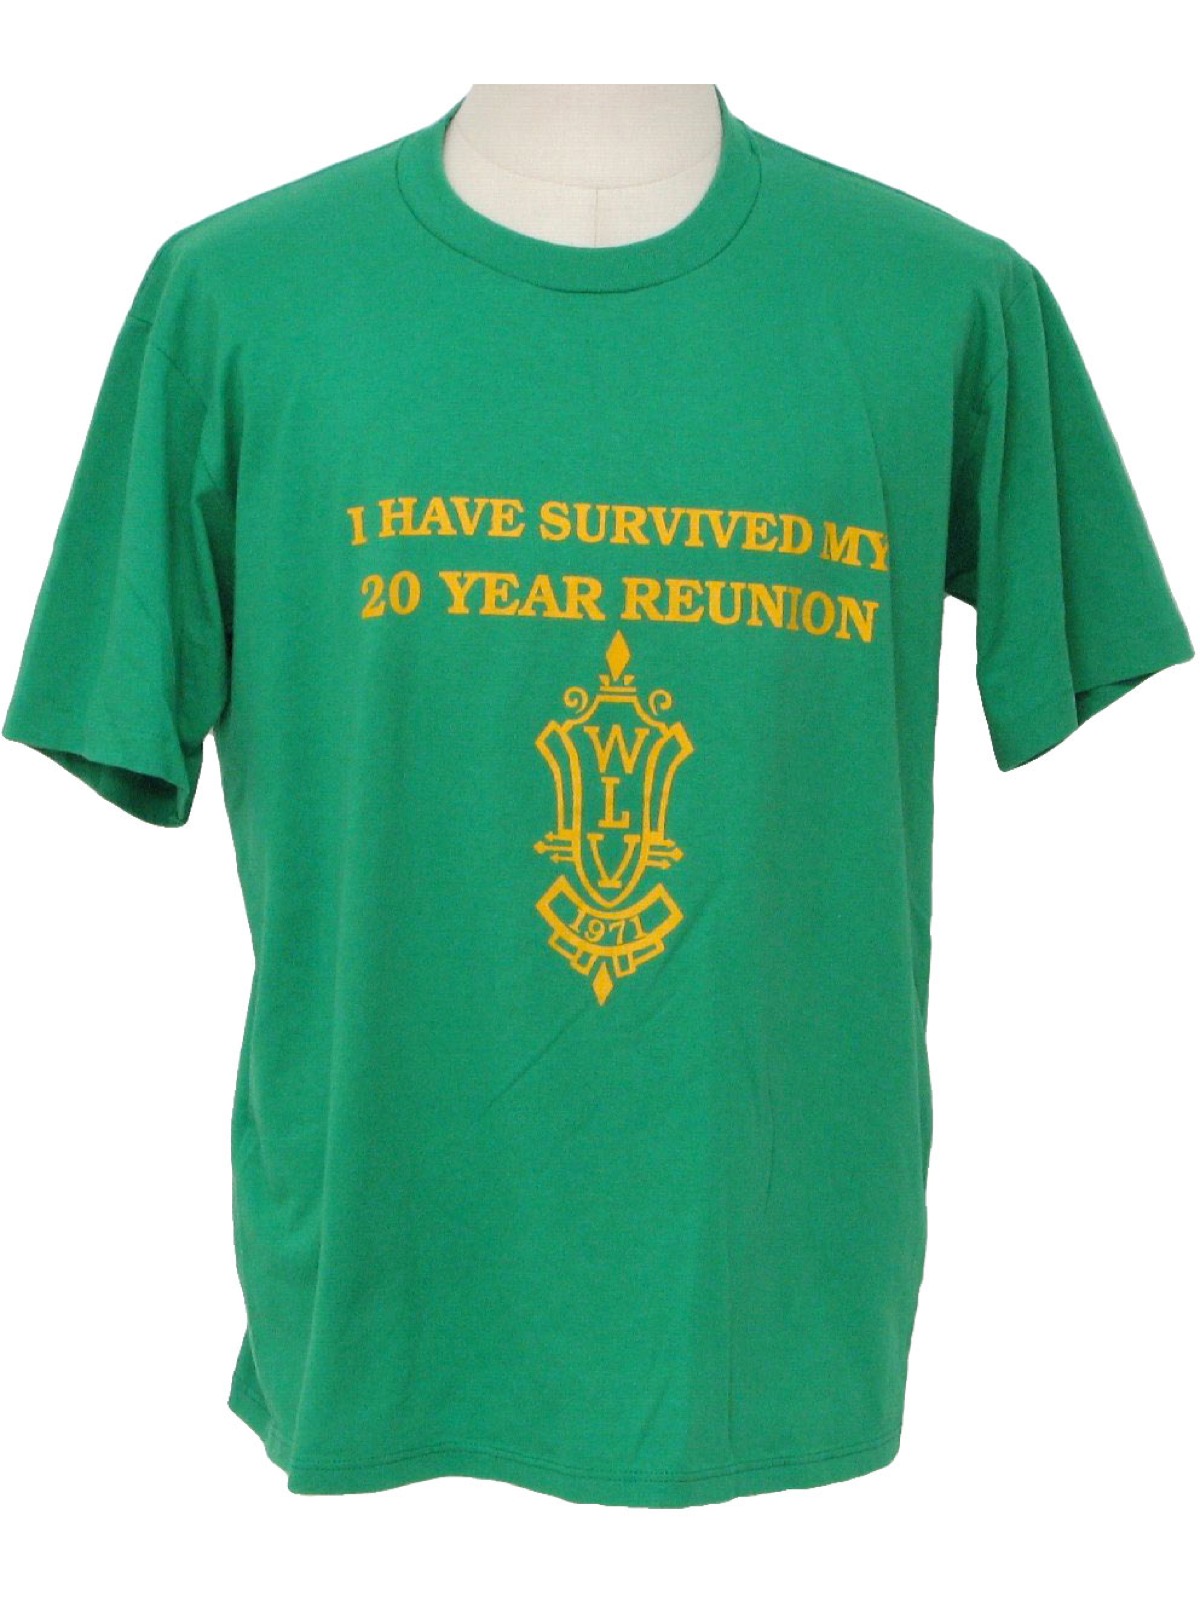 Retro 1990's T Shirt (Jerzees) : 90s -Jerzees- Mens green and yellow ...